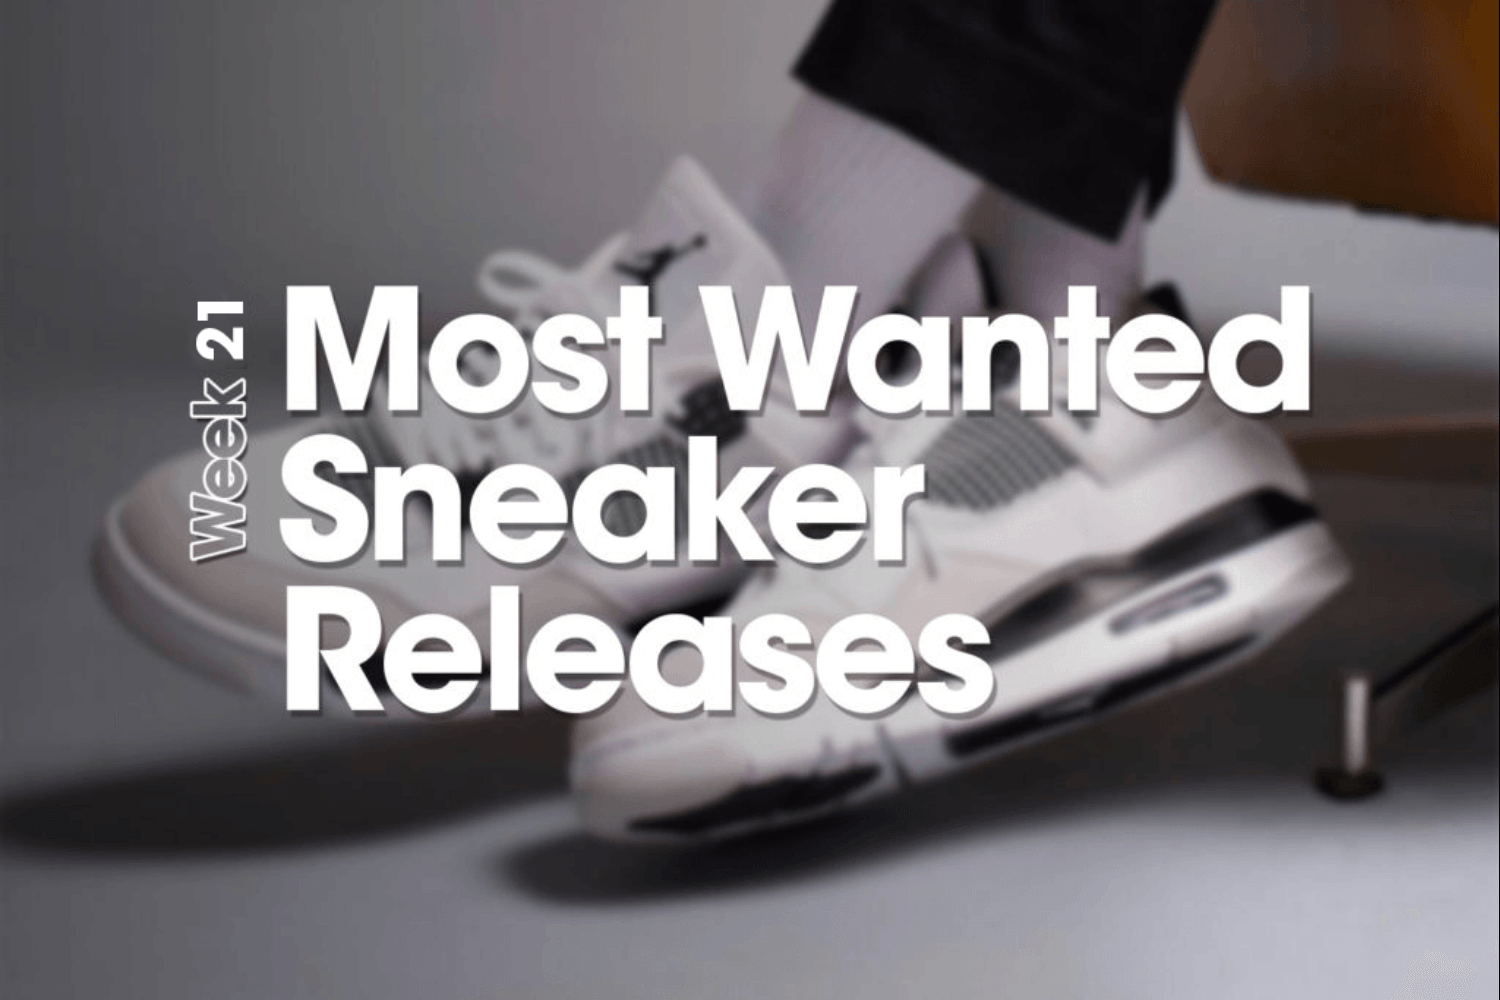 Most Wanted Sneaker Releases - Woche 21